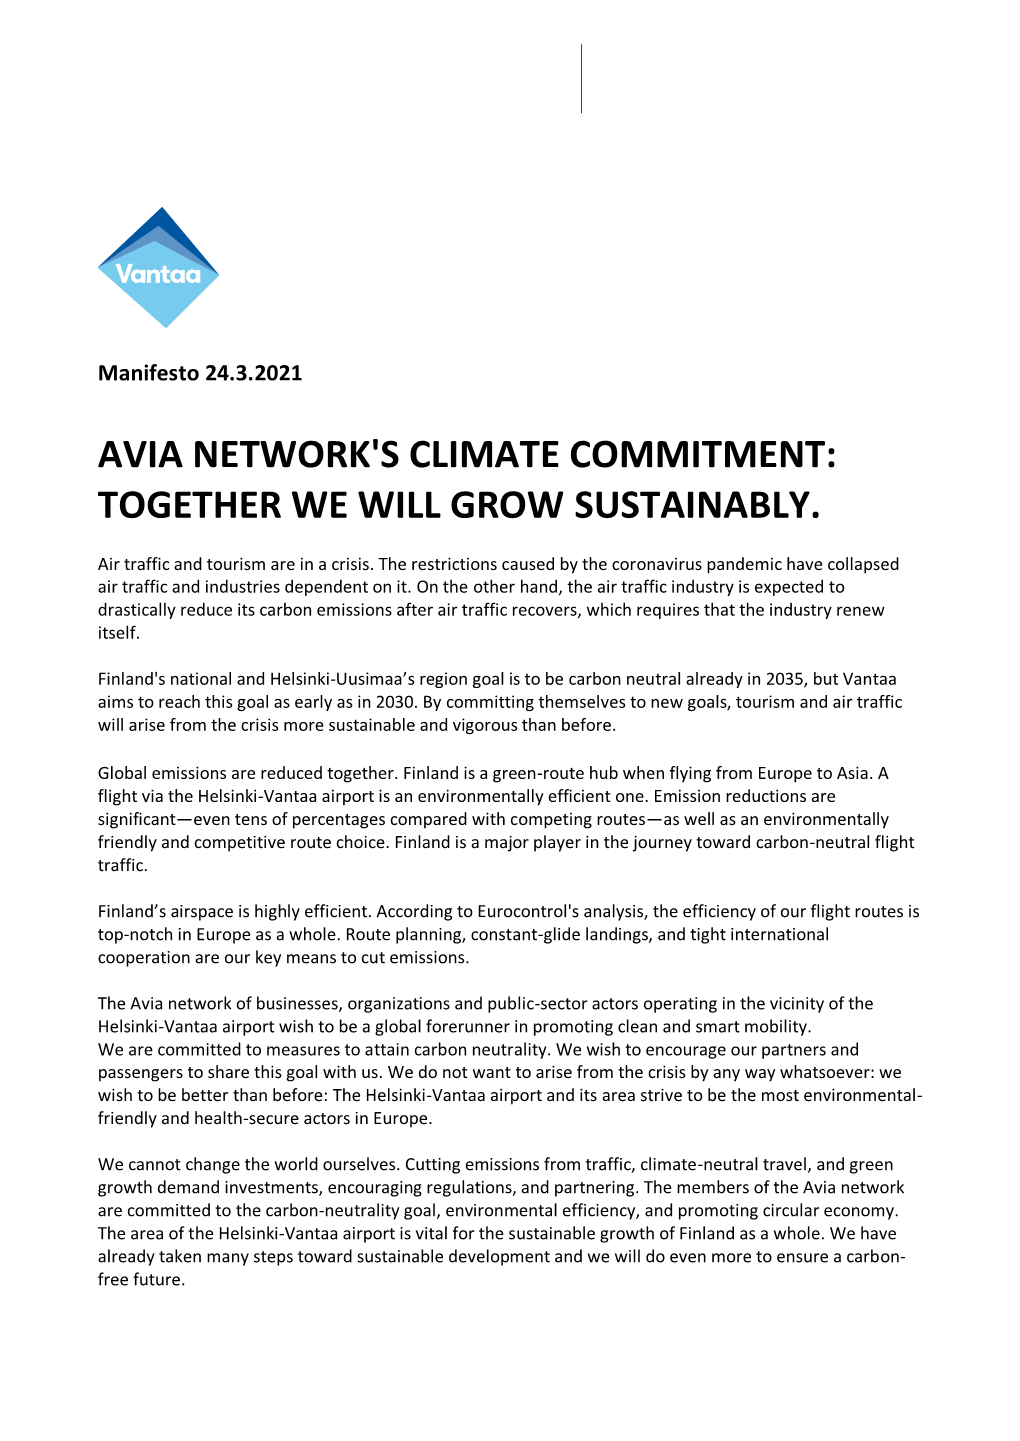 Avia-Network Green Deal Manifesto Climate Committement